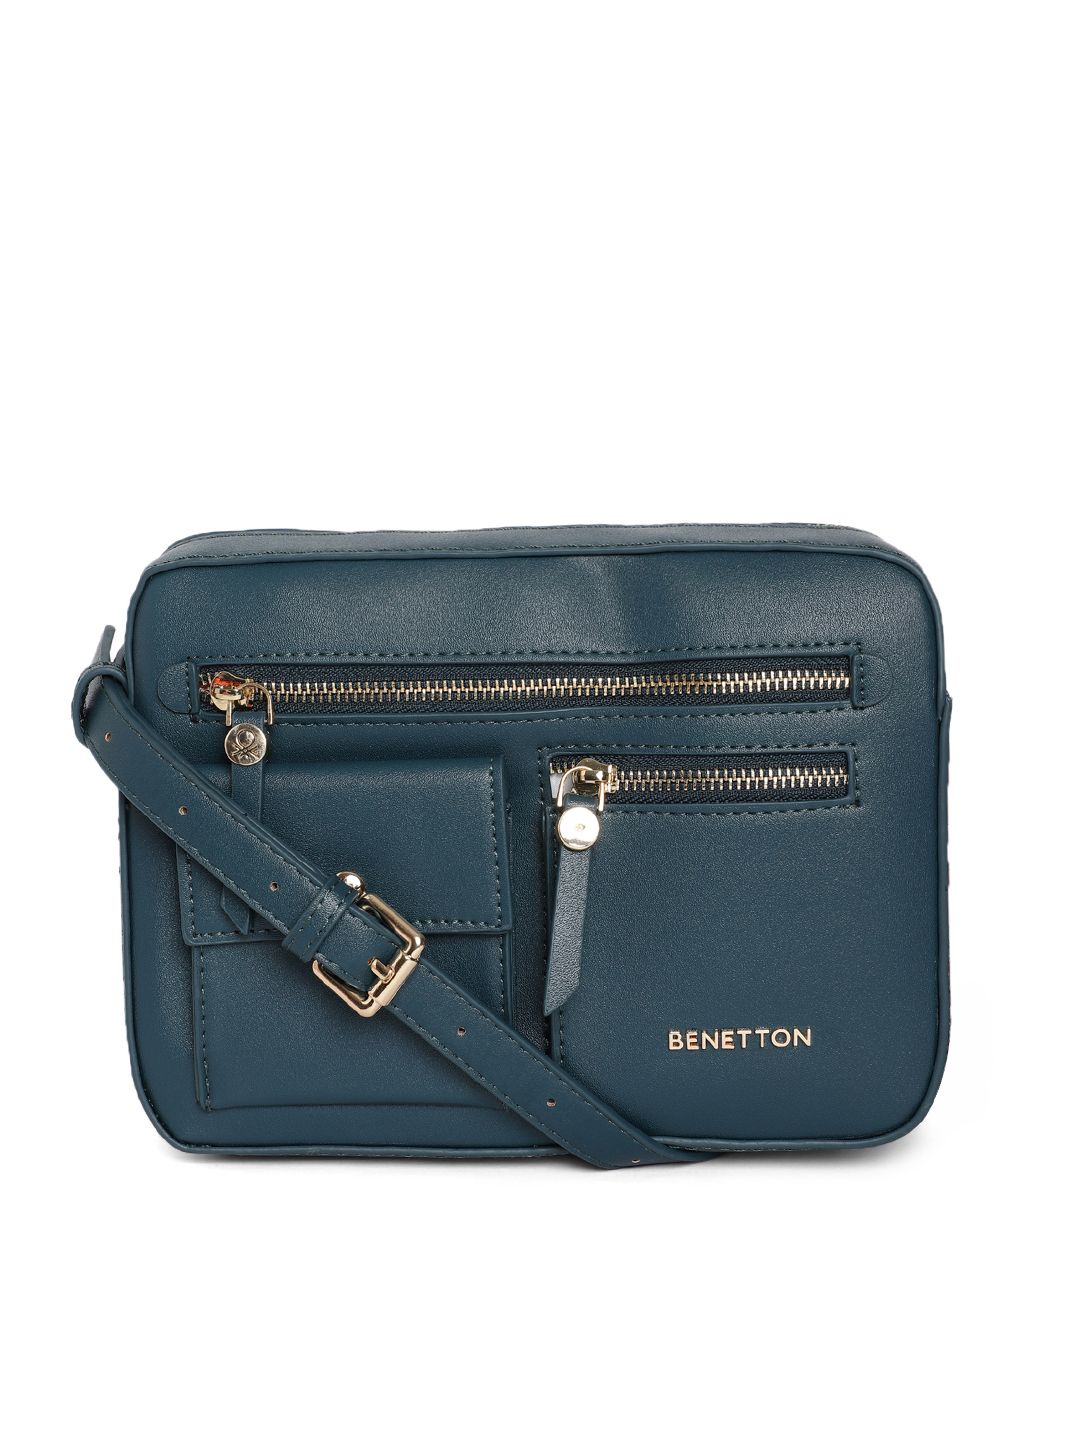 United Colors of Benetton Teal Green Solid Sling Bag Price in India